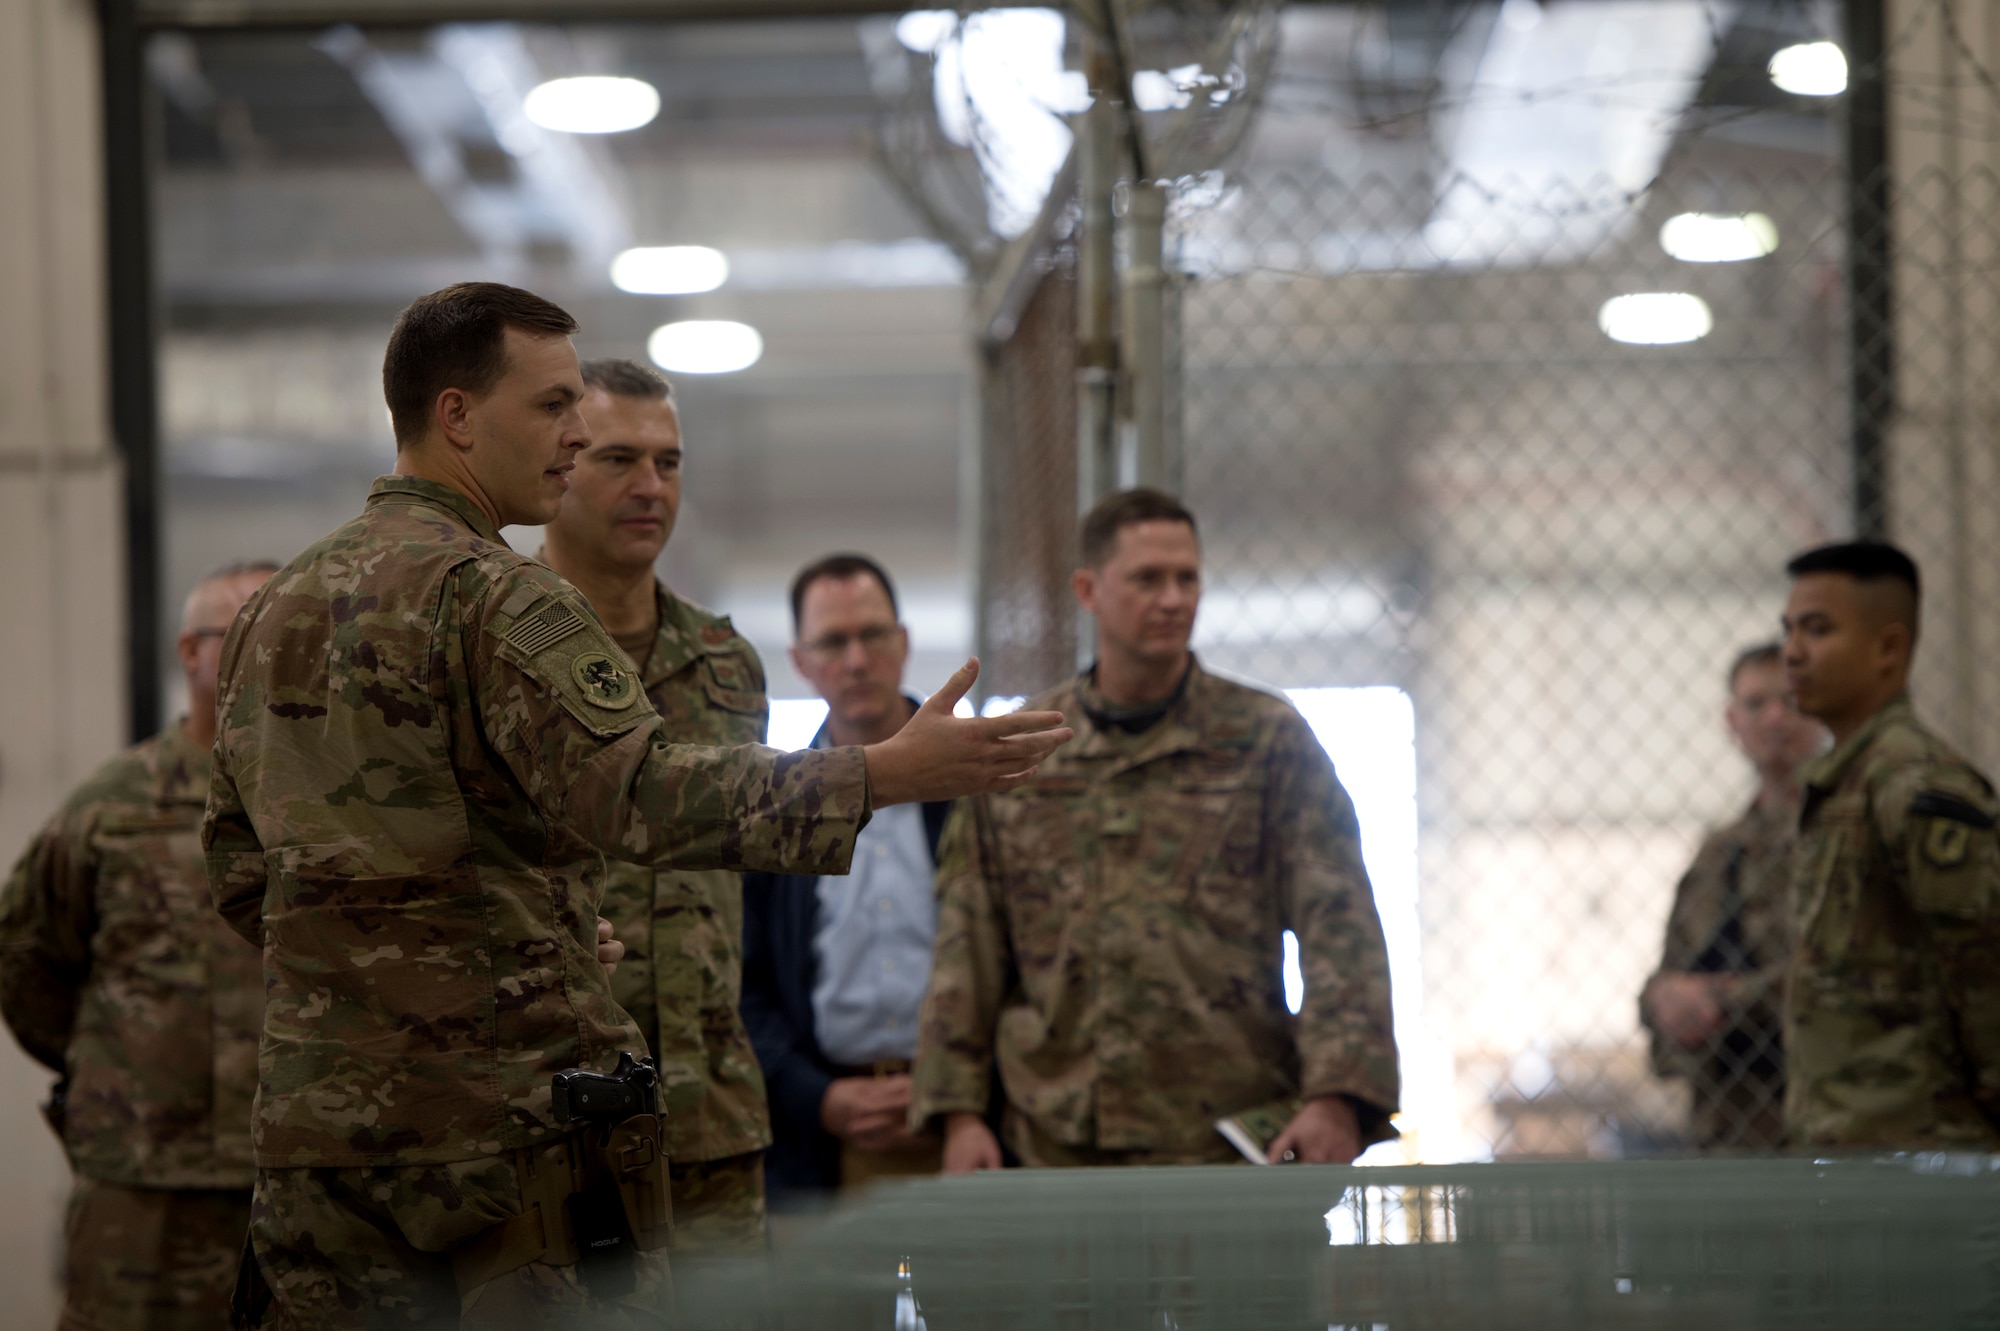 Airmen from the 455th Expeditionary Logistics Readiness Squadron give Lt. Gen. Joseph Guastella, commander of U.S. Air Forces Central Command, a tour of their facilities at Bagram Airfield, Afghanistan, Oct. 29, 2018.